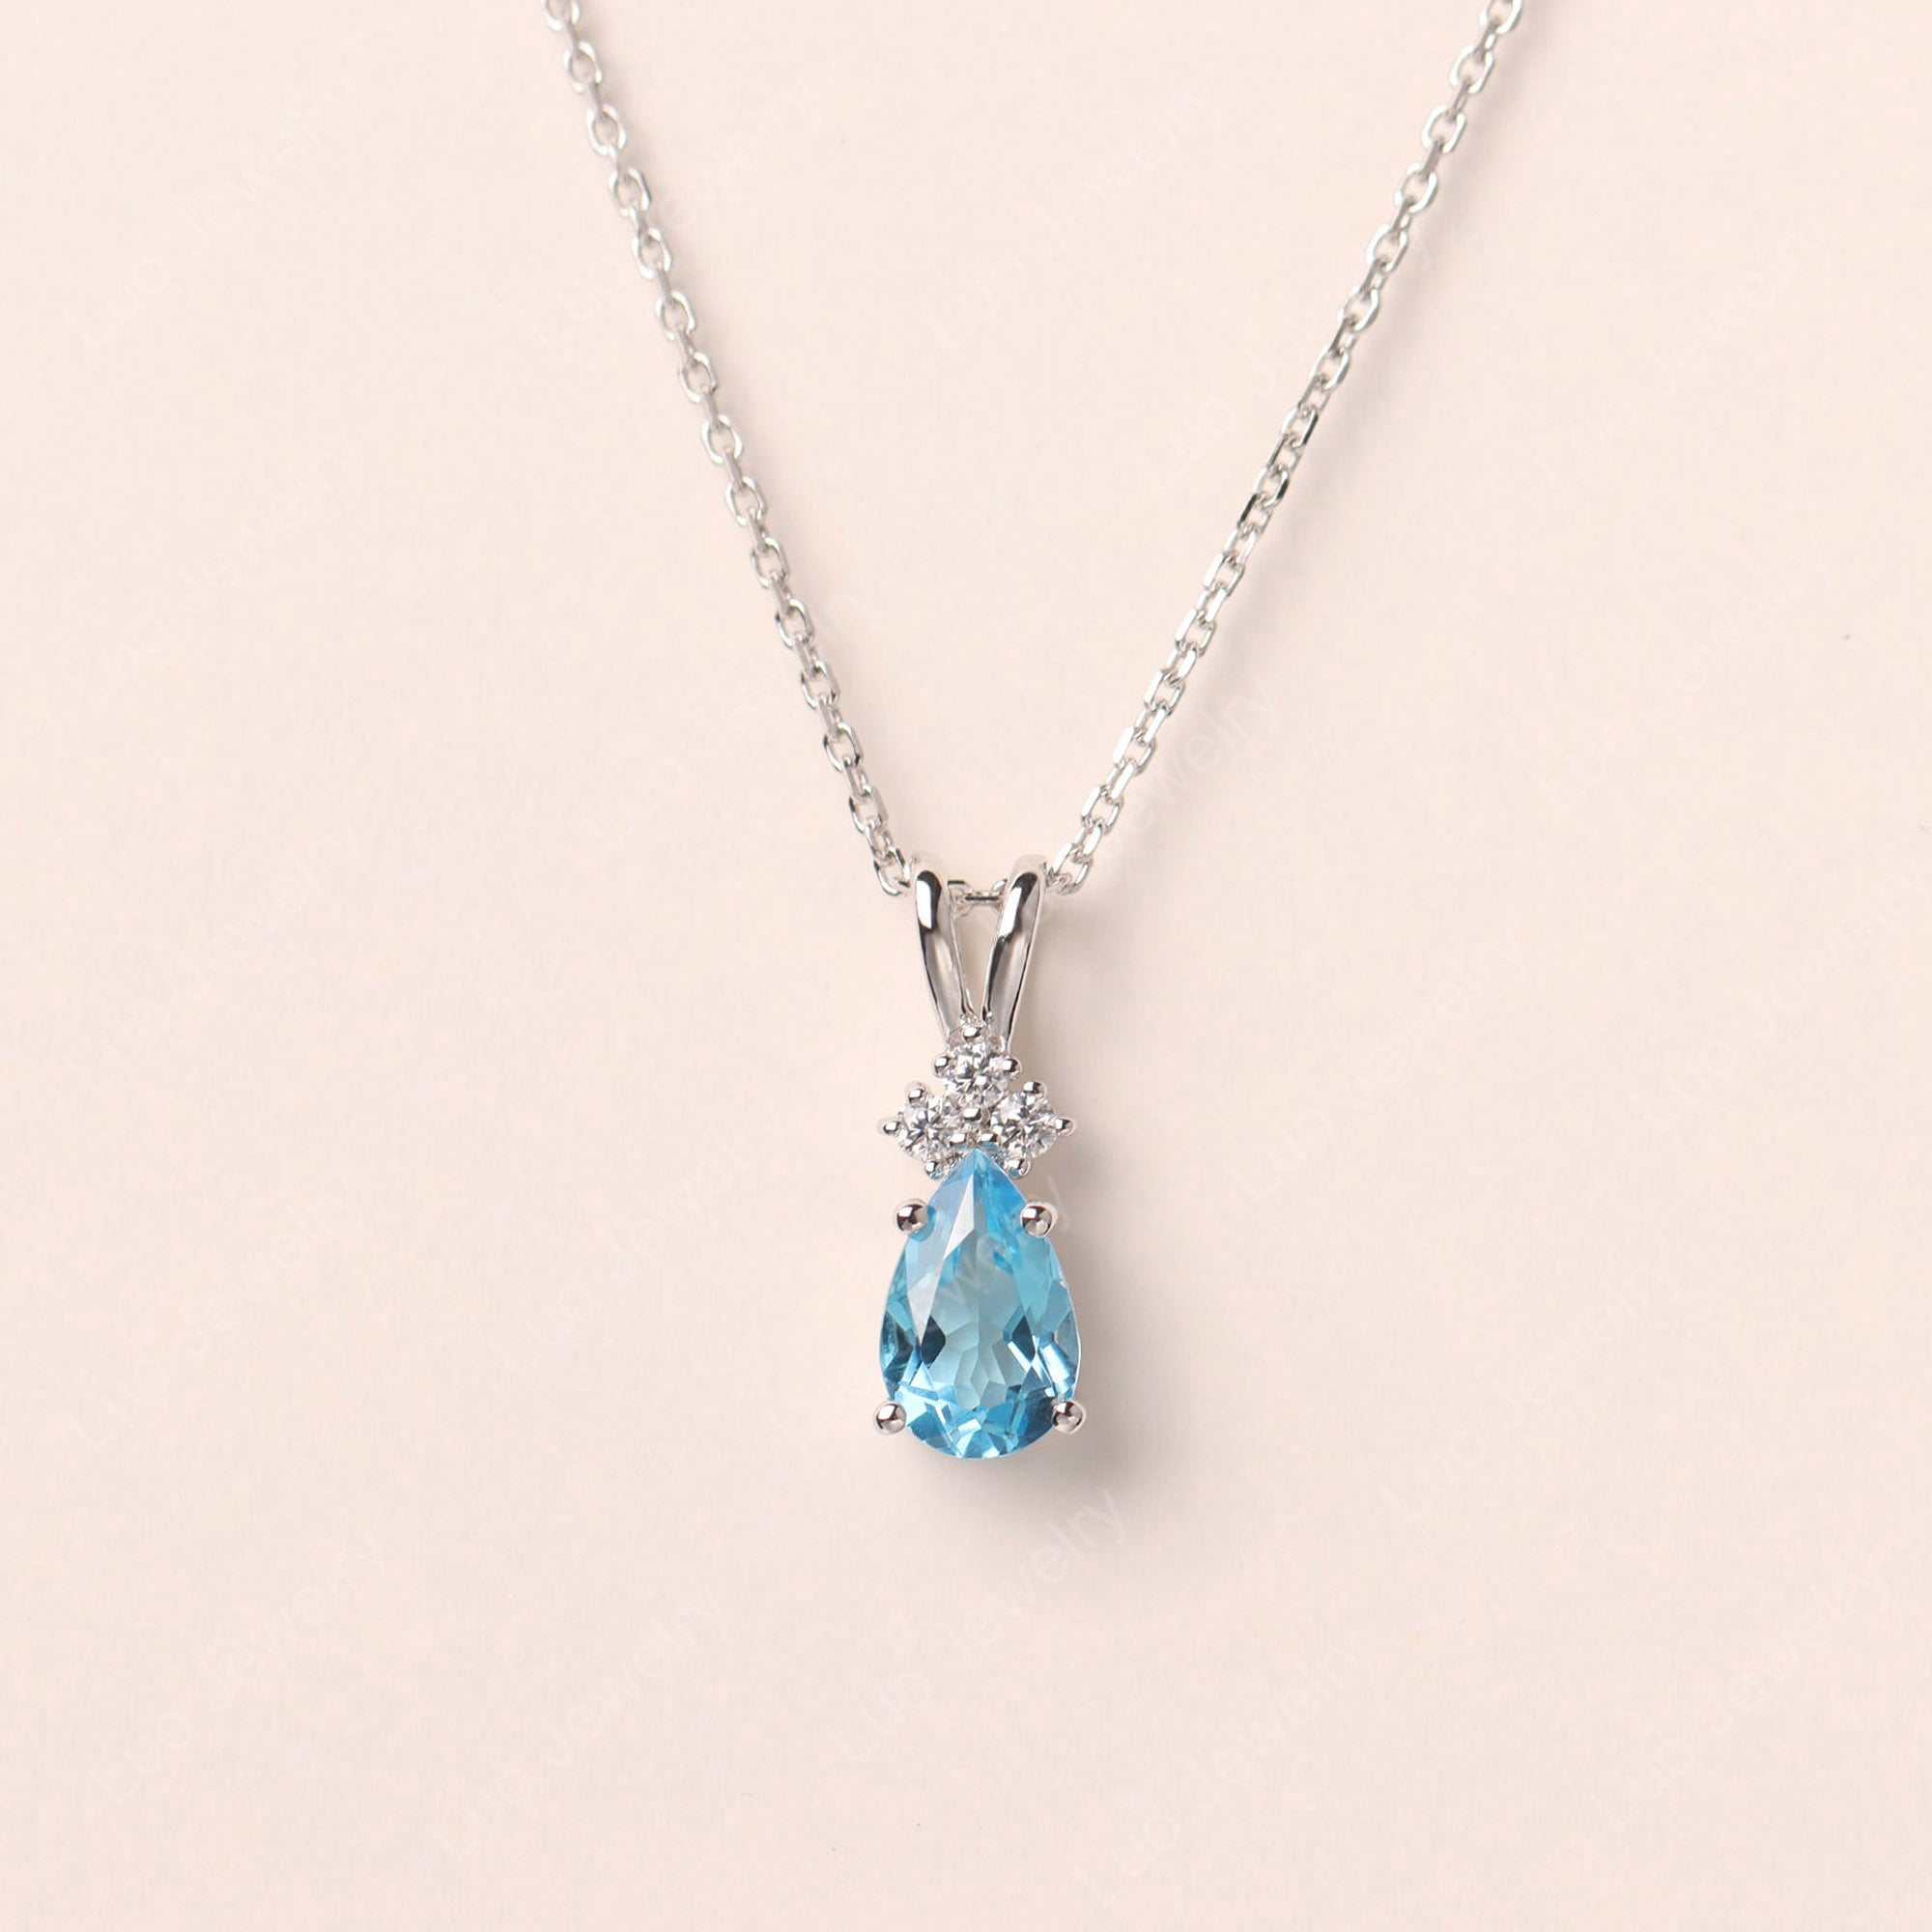 Pear Shaped Swiss Blue Topaz Necklace